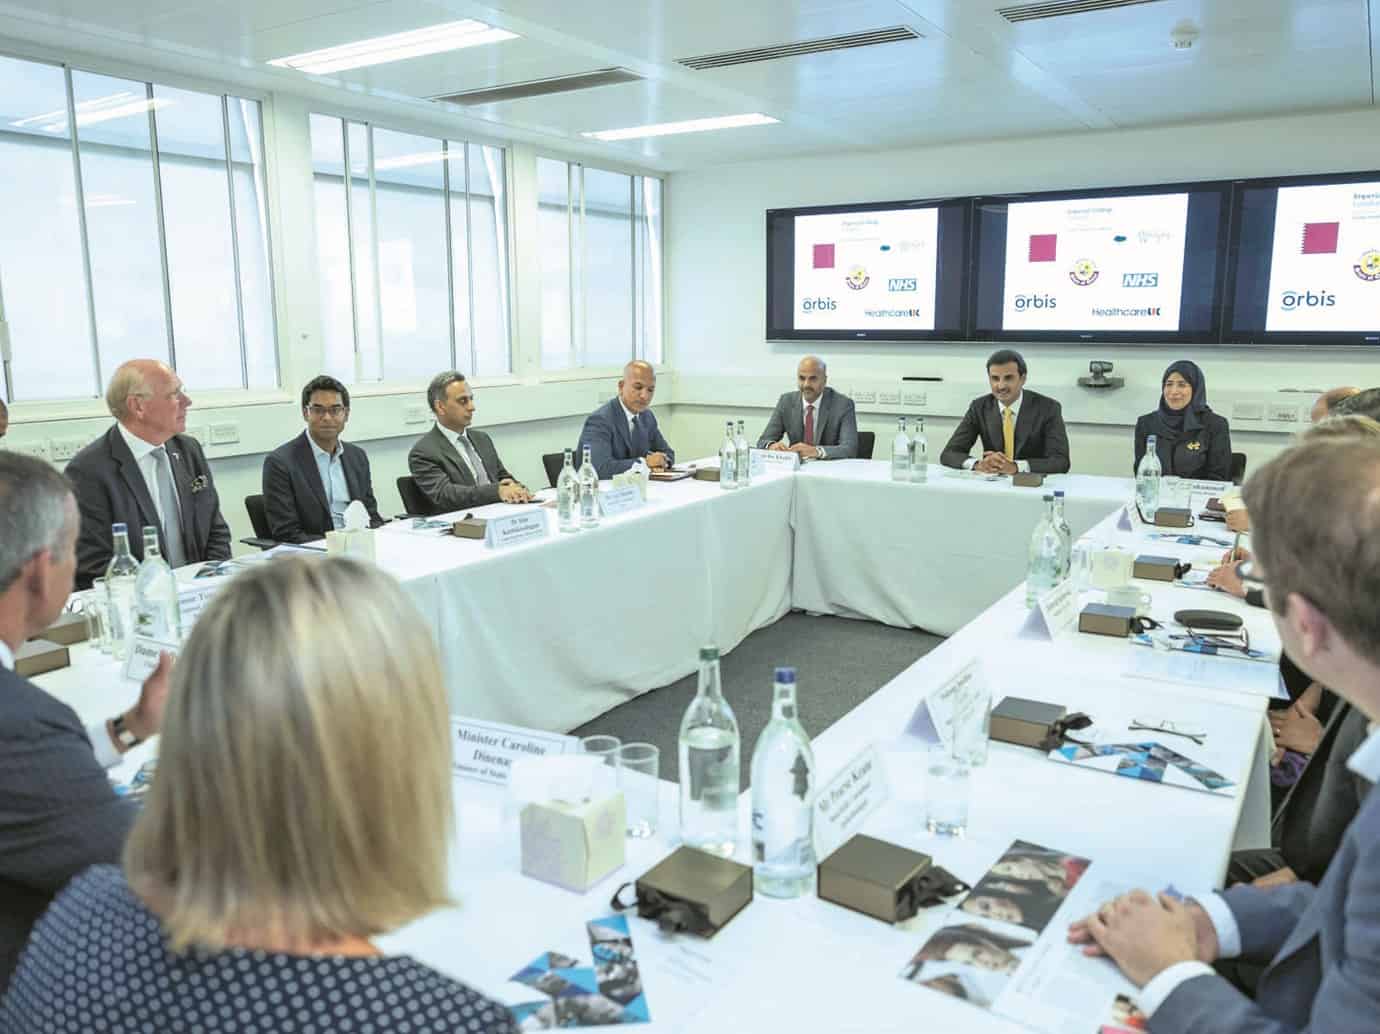 Amir visits Imperial College, London's financial district